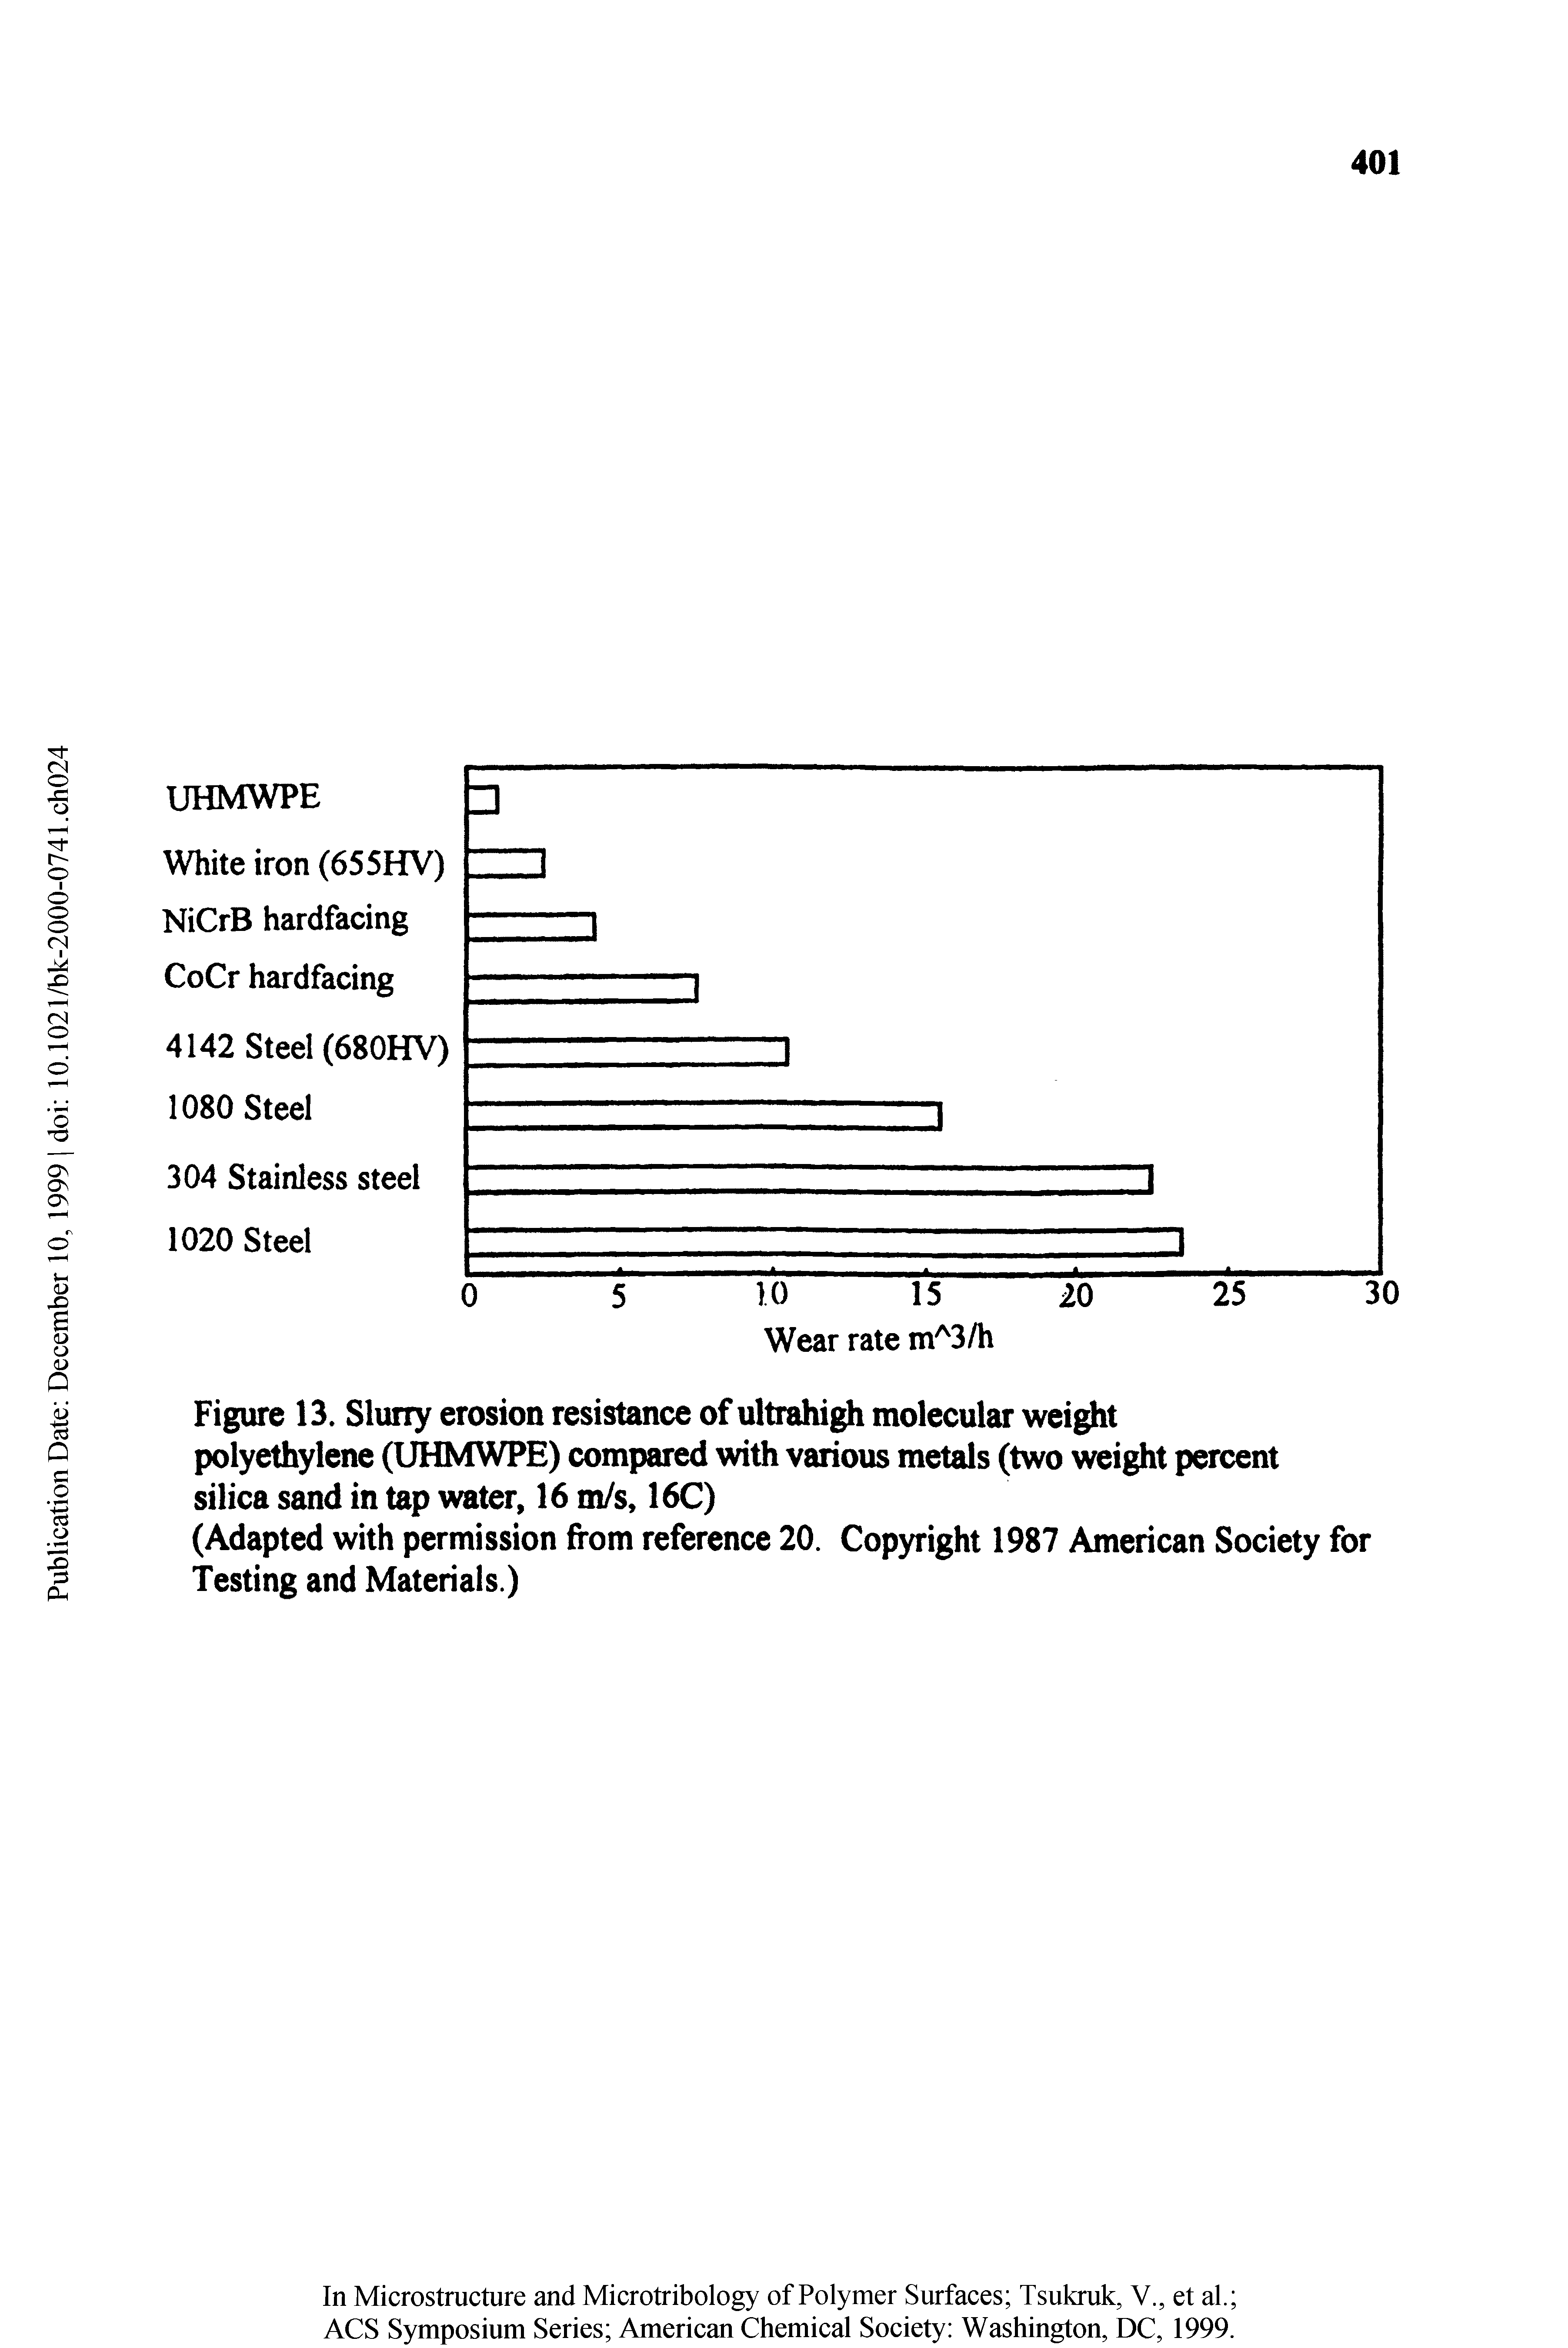 Figure 13. Slurry erosion resistance of ultrahigh molecular weight polyethylene (UHMWPE) compared with various metals (two weight percent silica sand in tap water, 16 m/s, 16C)...